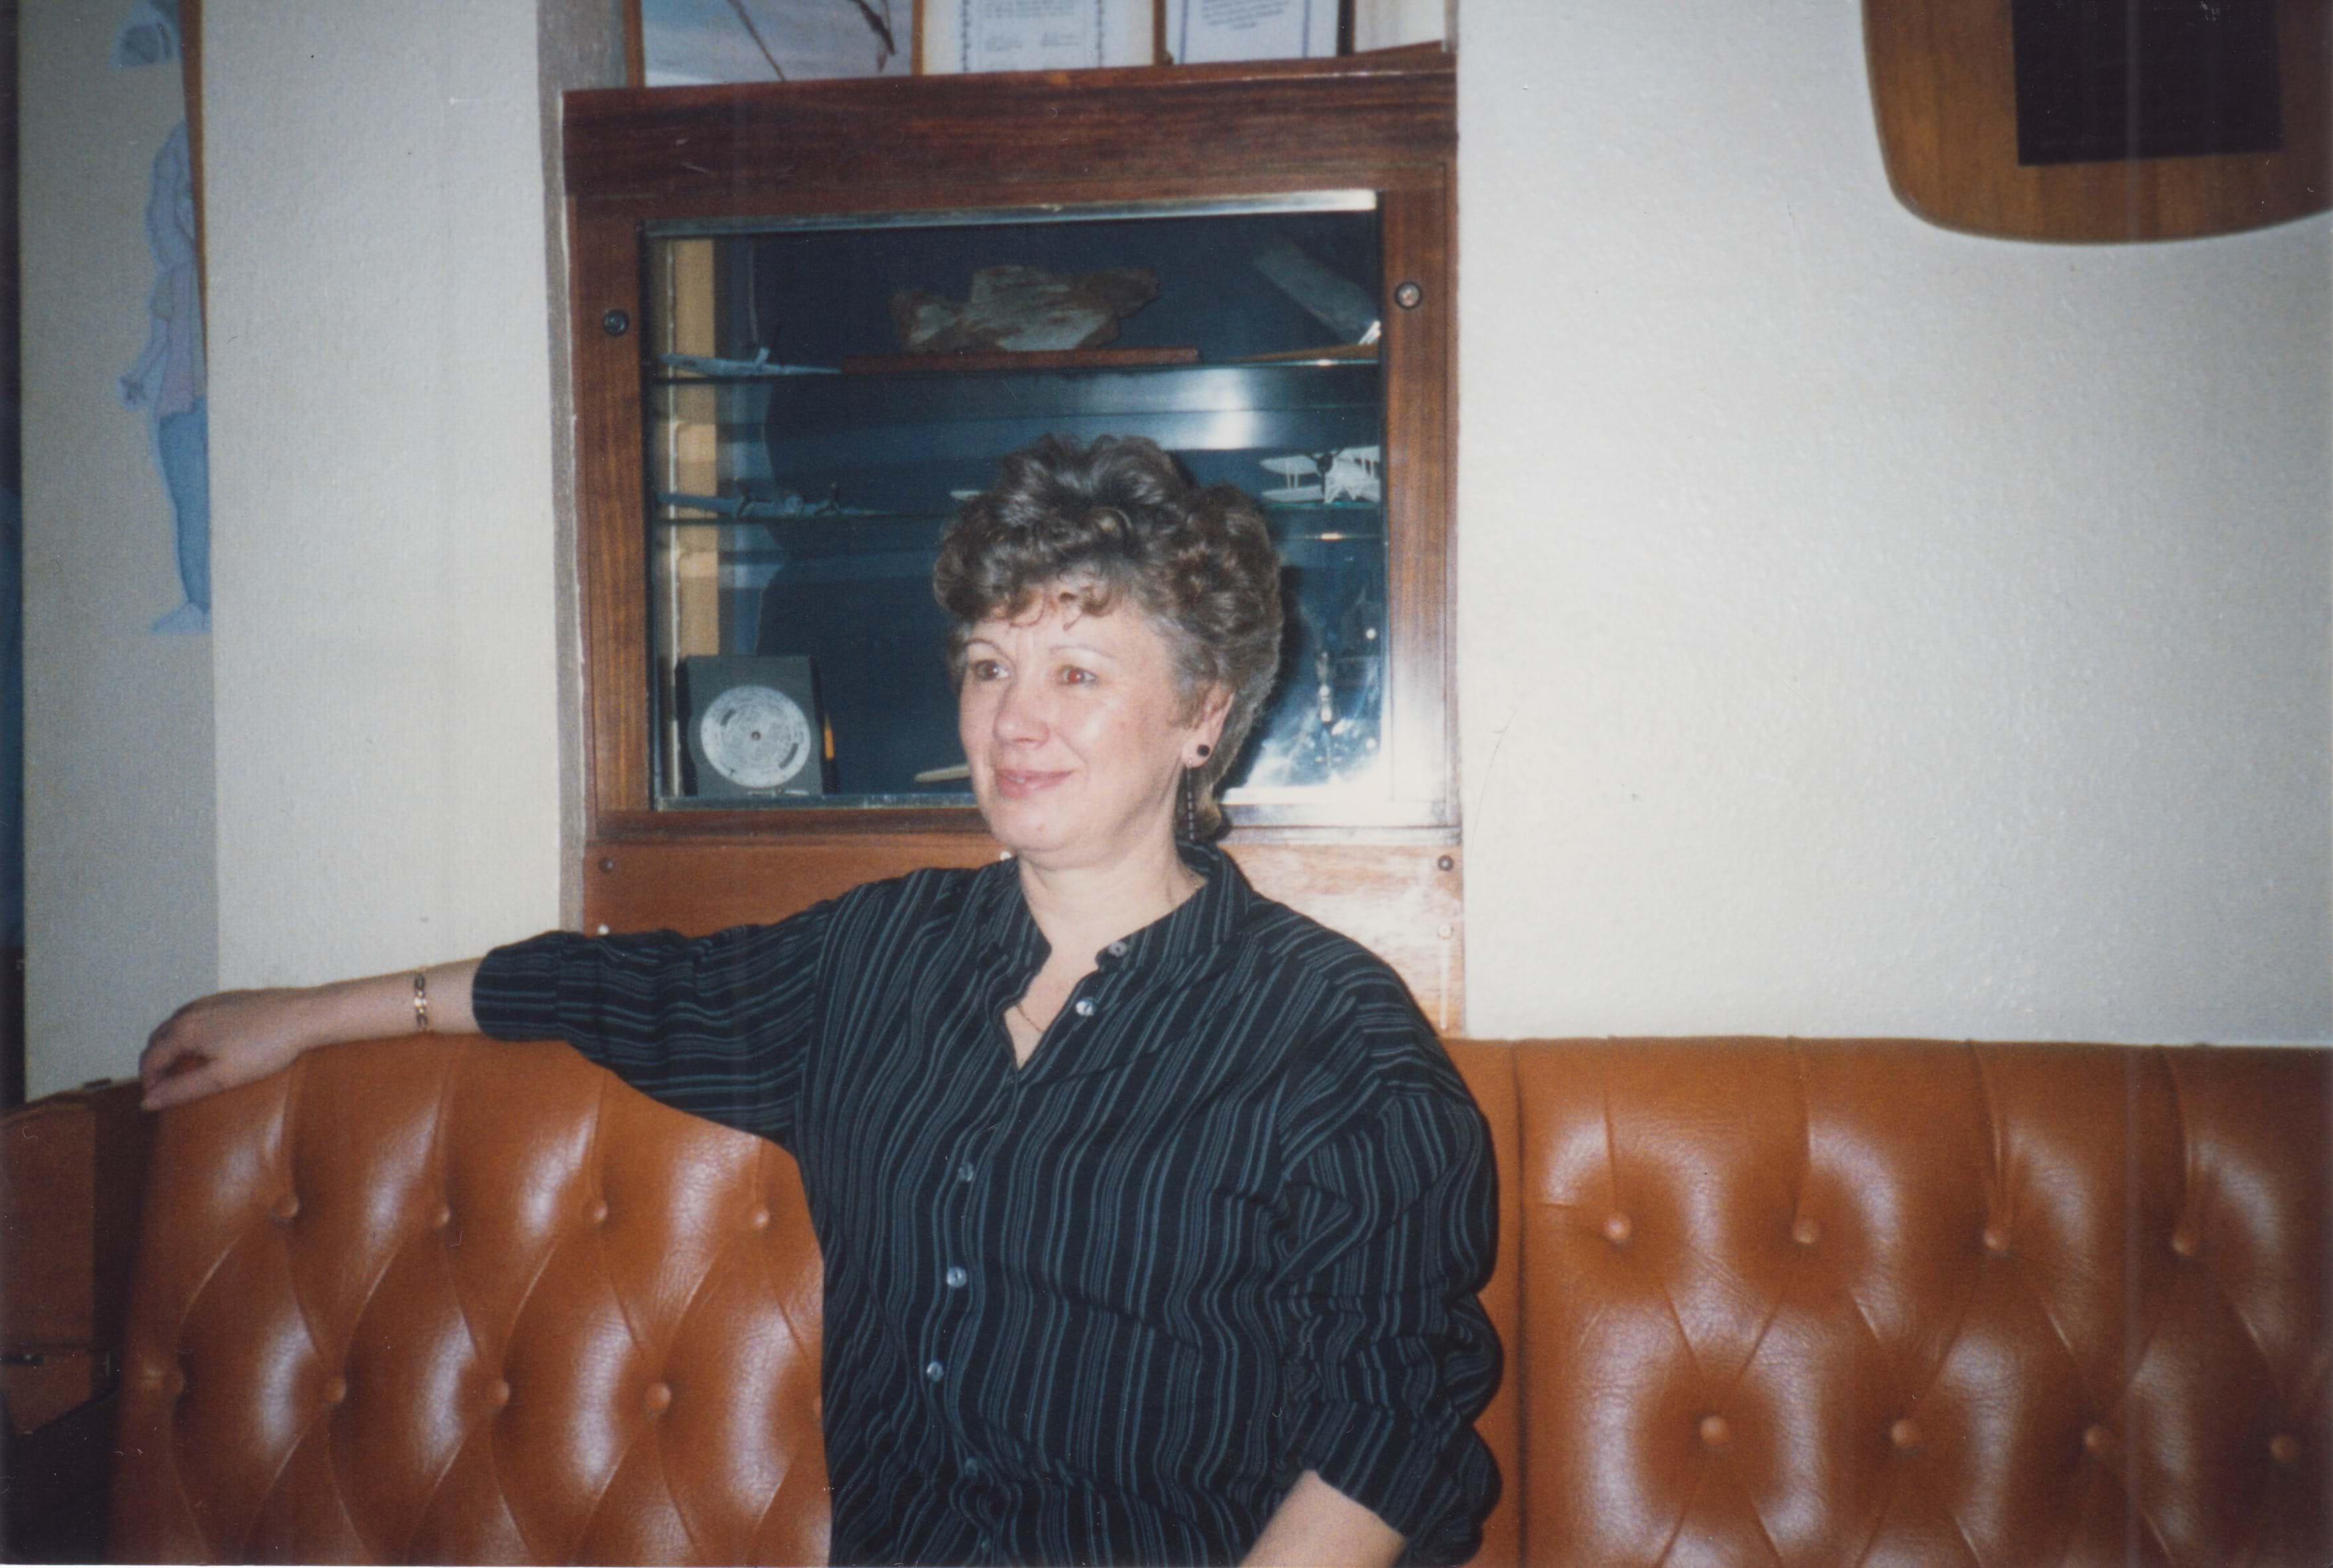 Jean Wordsworth, a former High Wycombe school caretaker who has died of mesothelioma